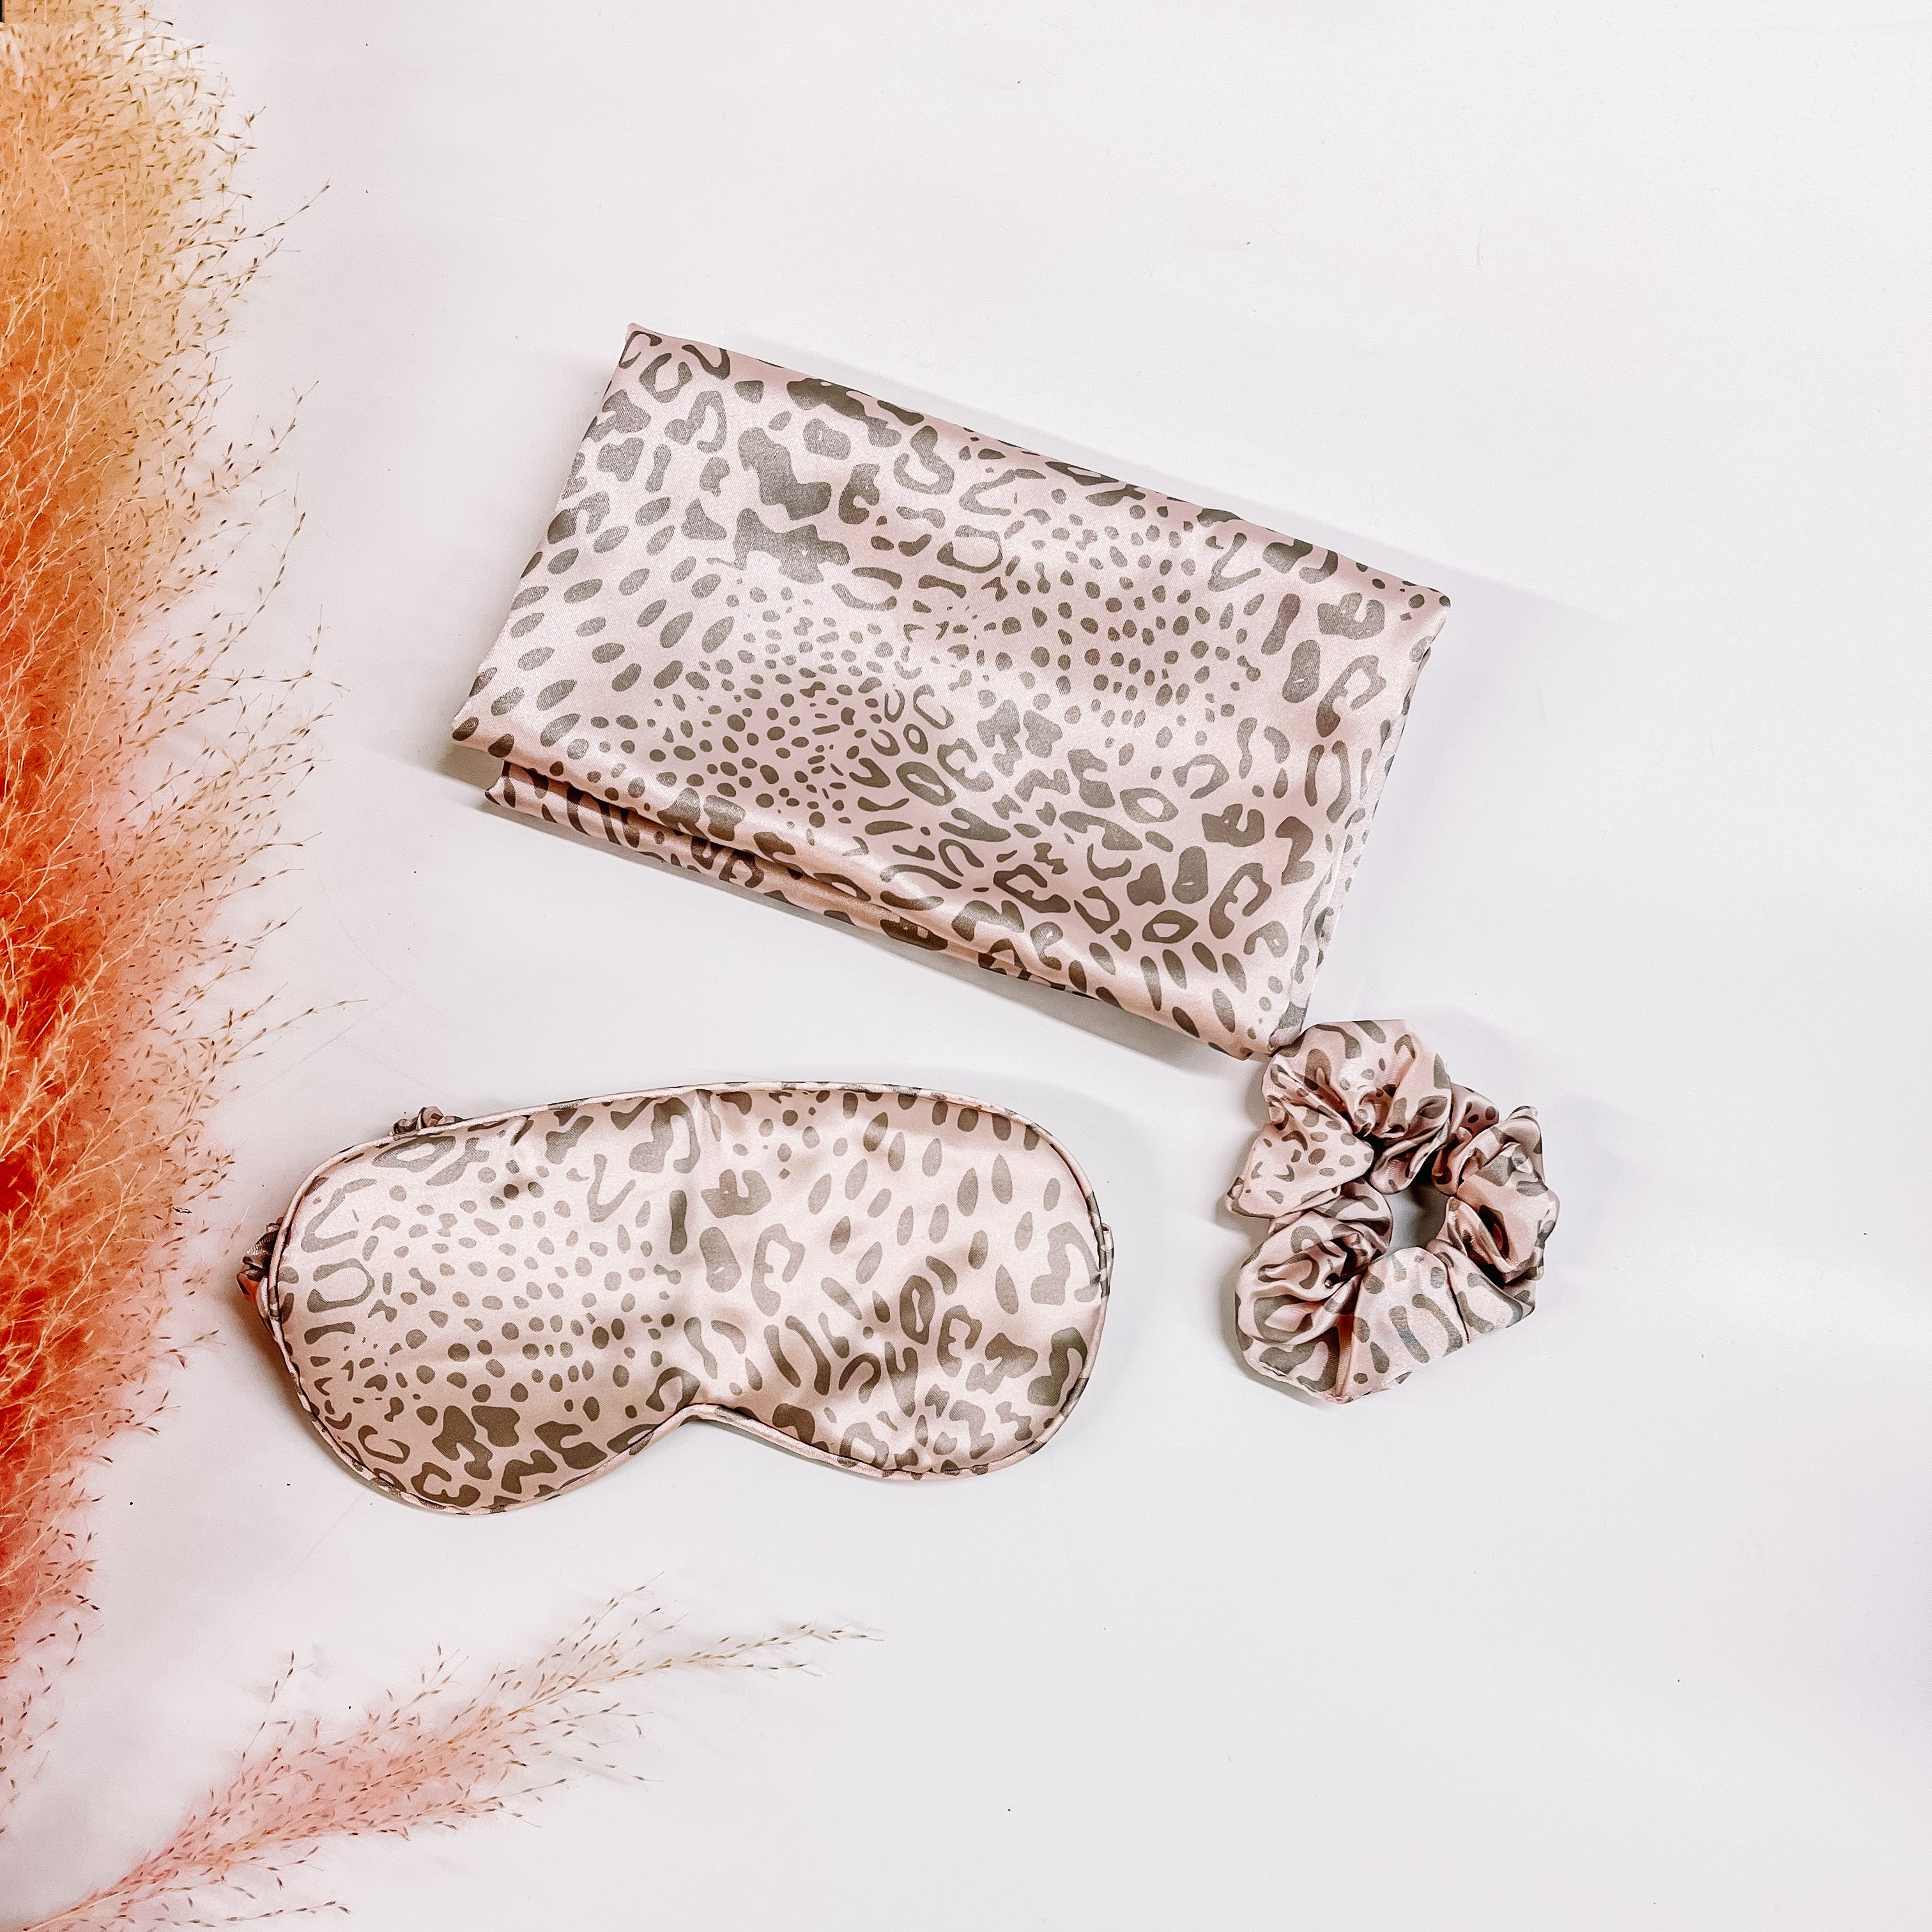 There is a satin leopard print pillow case, eye mask, and a scrunchie. The leopard print is in light pink and grey. These items are taken on a white background with a pink plant in the side as decor.